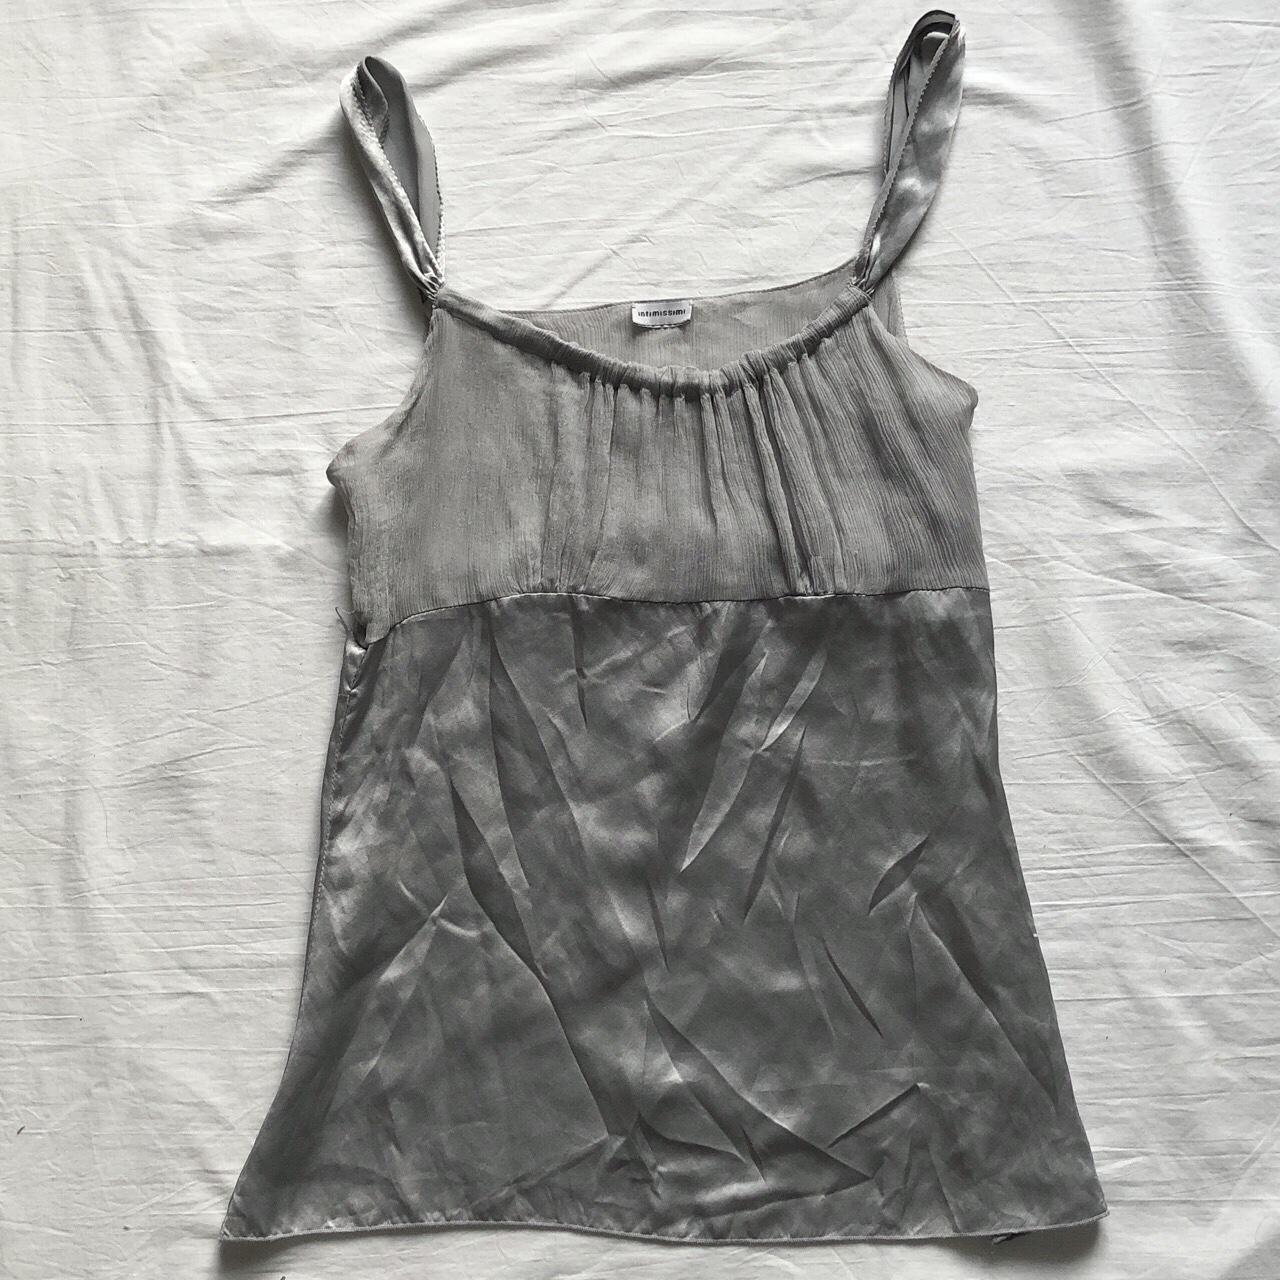 Product Image 1 - Intimissimi silver top

No size or